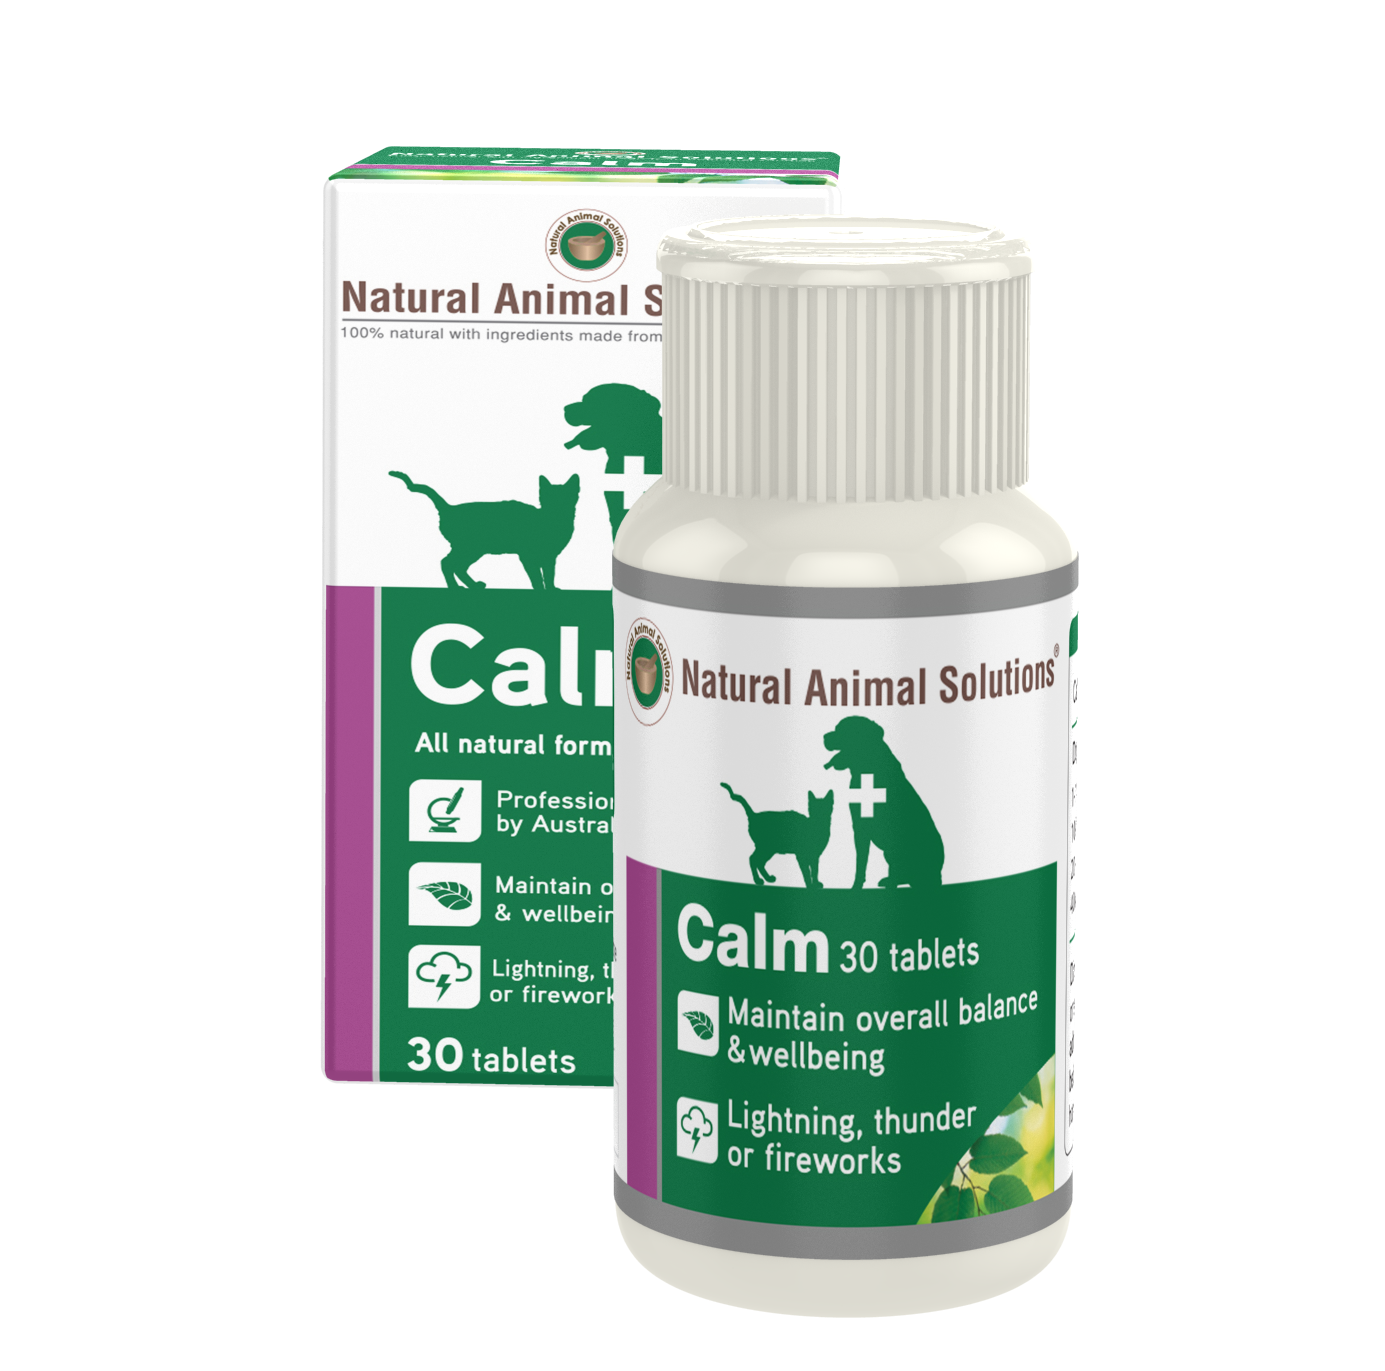 Natural Animal Solutions Calm - Tablets by Natural Animal Solutions